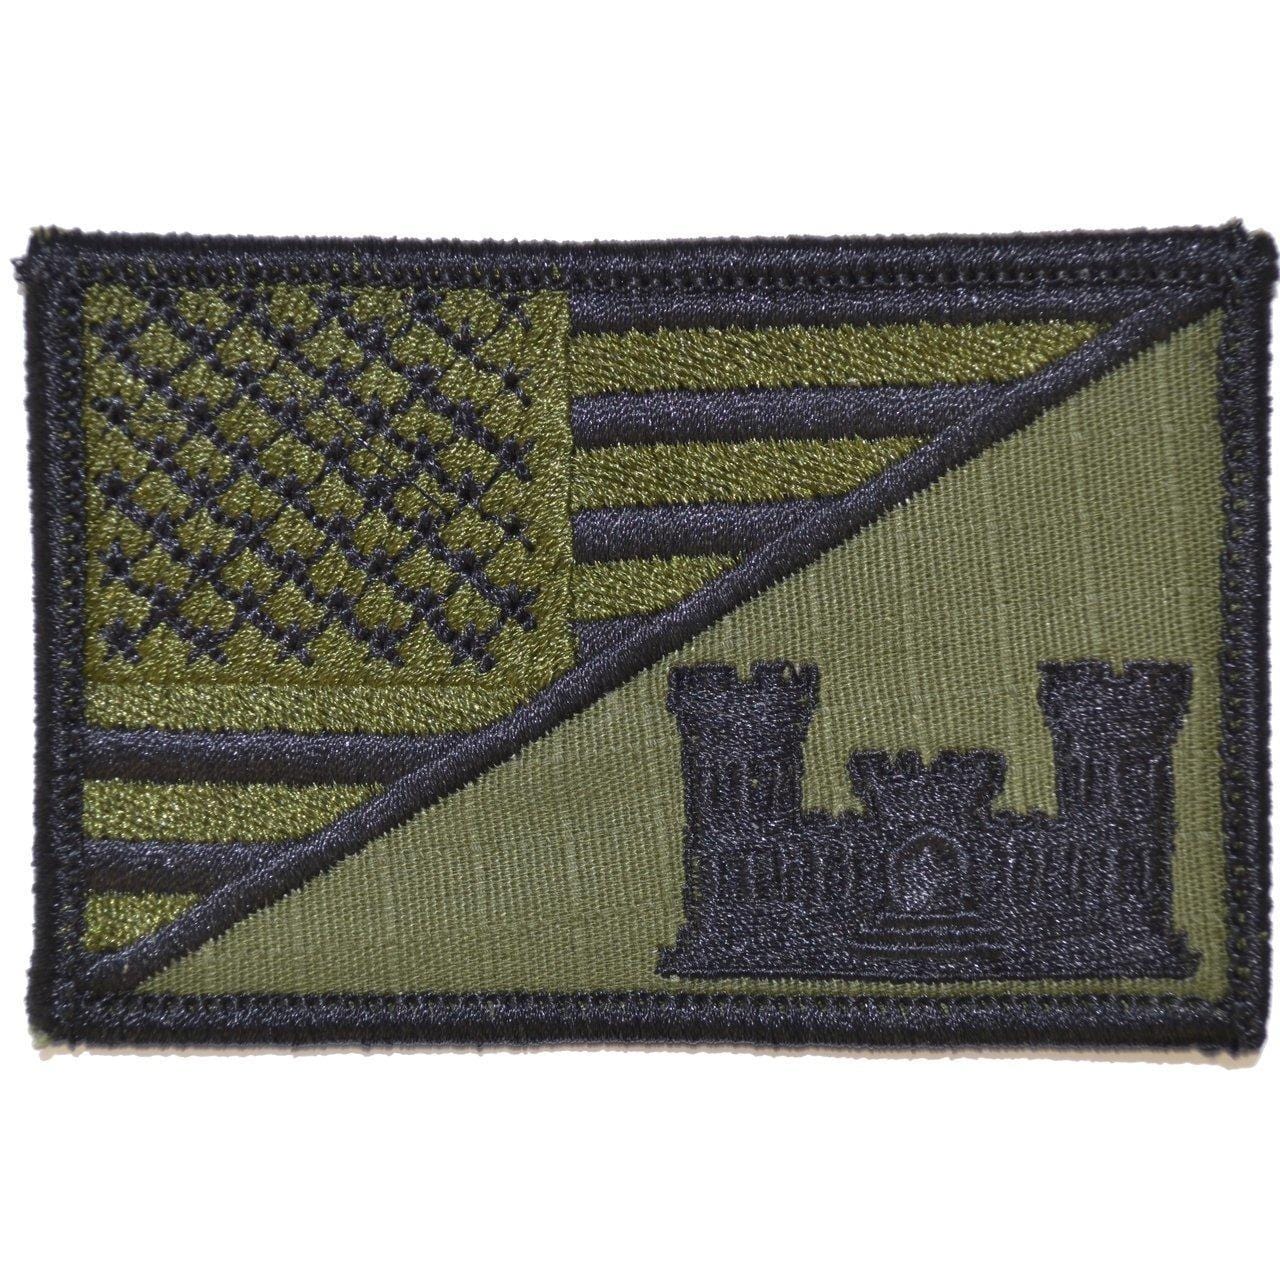 Tactical Gear Junkie Patches Olive Drab Army Engineer Castle USA Flag - 2.25x3.5 Patch